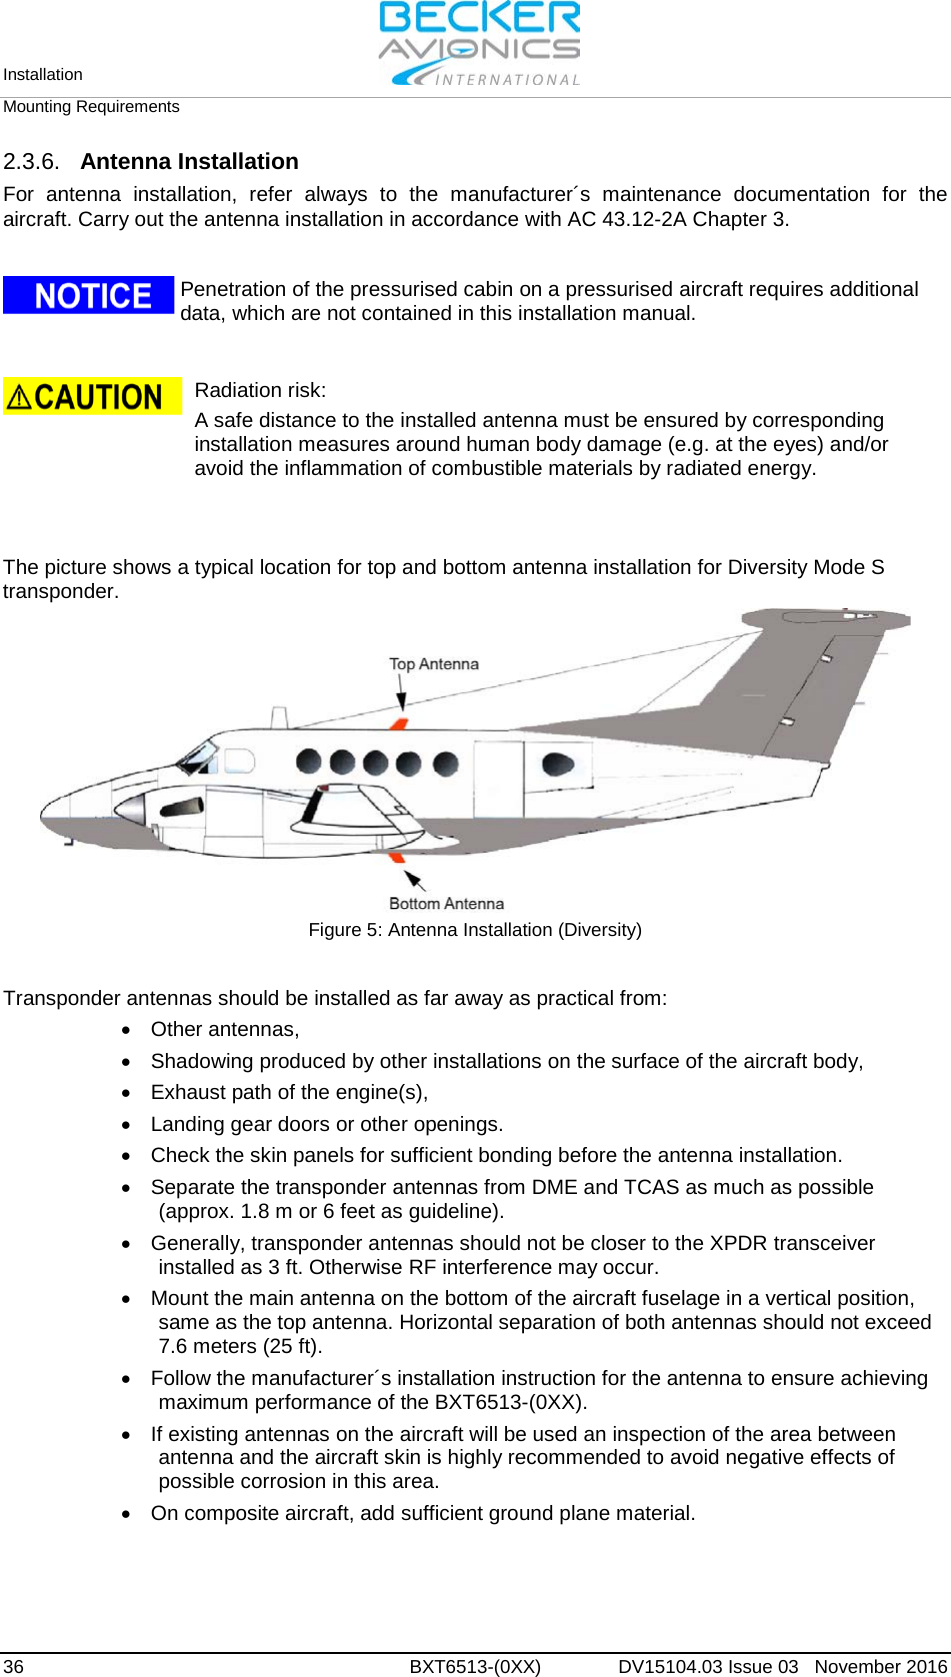 Installation   Mounting Requirements  36 BXT6513-(0XX)  DV15104.03 Issue 03   November 2016 2.3.6. Antenna Installation For antenna installation, refer always to the manufacturer´s maintenance documentation for the aircraft. Carry out the antenna installation in accordance with AC 43.12-2A Chapter 3.    Penetration of the pressurised cabin on a pressurised aircraft requires additional data, which are not contained in this installation manual.     Radiation risk:  A safe distance to the installed antenna must be ensured by corresponding installation measures around human body damage (e.g. at the eyes) and/or avoid the inflammation of combustible materials by radiated energy.     The picture shows a typical location for top and bottom antenna installation for Diversity Mode S transponder.  Figure 5: Antenna Installation (Diversity)   Transponder antennas should be installed as far away as practical from: •  Other antennas,  •  Shadowing produced by other installations on the surface of the aircraft body, •  Exhaust path of the engine(s), •  Landing gear doors or other openings. • Check the skin panels for sufficient bonding before the antenna installation. • Separate the transponder antennas from DME and TCAS as much as possible (approx. 1.8 m or 6 feet as guideline). • Generally, transponder antennas should not be closer to the XPDR transceiver installed as 3 ft. Otherwise RF interference may occur. • Mount the main antenna on the bottom of the aircraft fuselage in a vertical position, same as the top antenna. Horizontal separation of both antennas should not exceed 7.6 meters (25 ft). • Follow the manufacturer´s installation instruction for the antenna to ensure achieving maximum performance of the BXT6513-(0XX). • If existing antennas on the aircraft will be used an inspection of the area between antenna and the aircraft skin is highly recommended to avoid negative effects of possible corrosion in this area. • On composite aircraft, add sufficient ground plane material.   